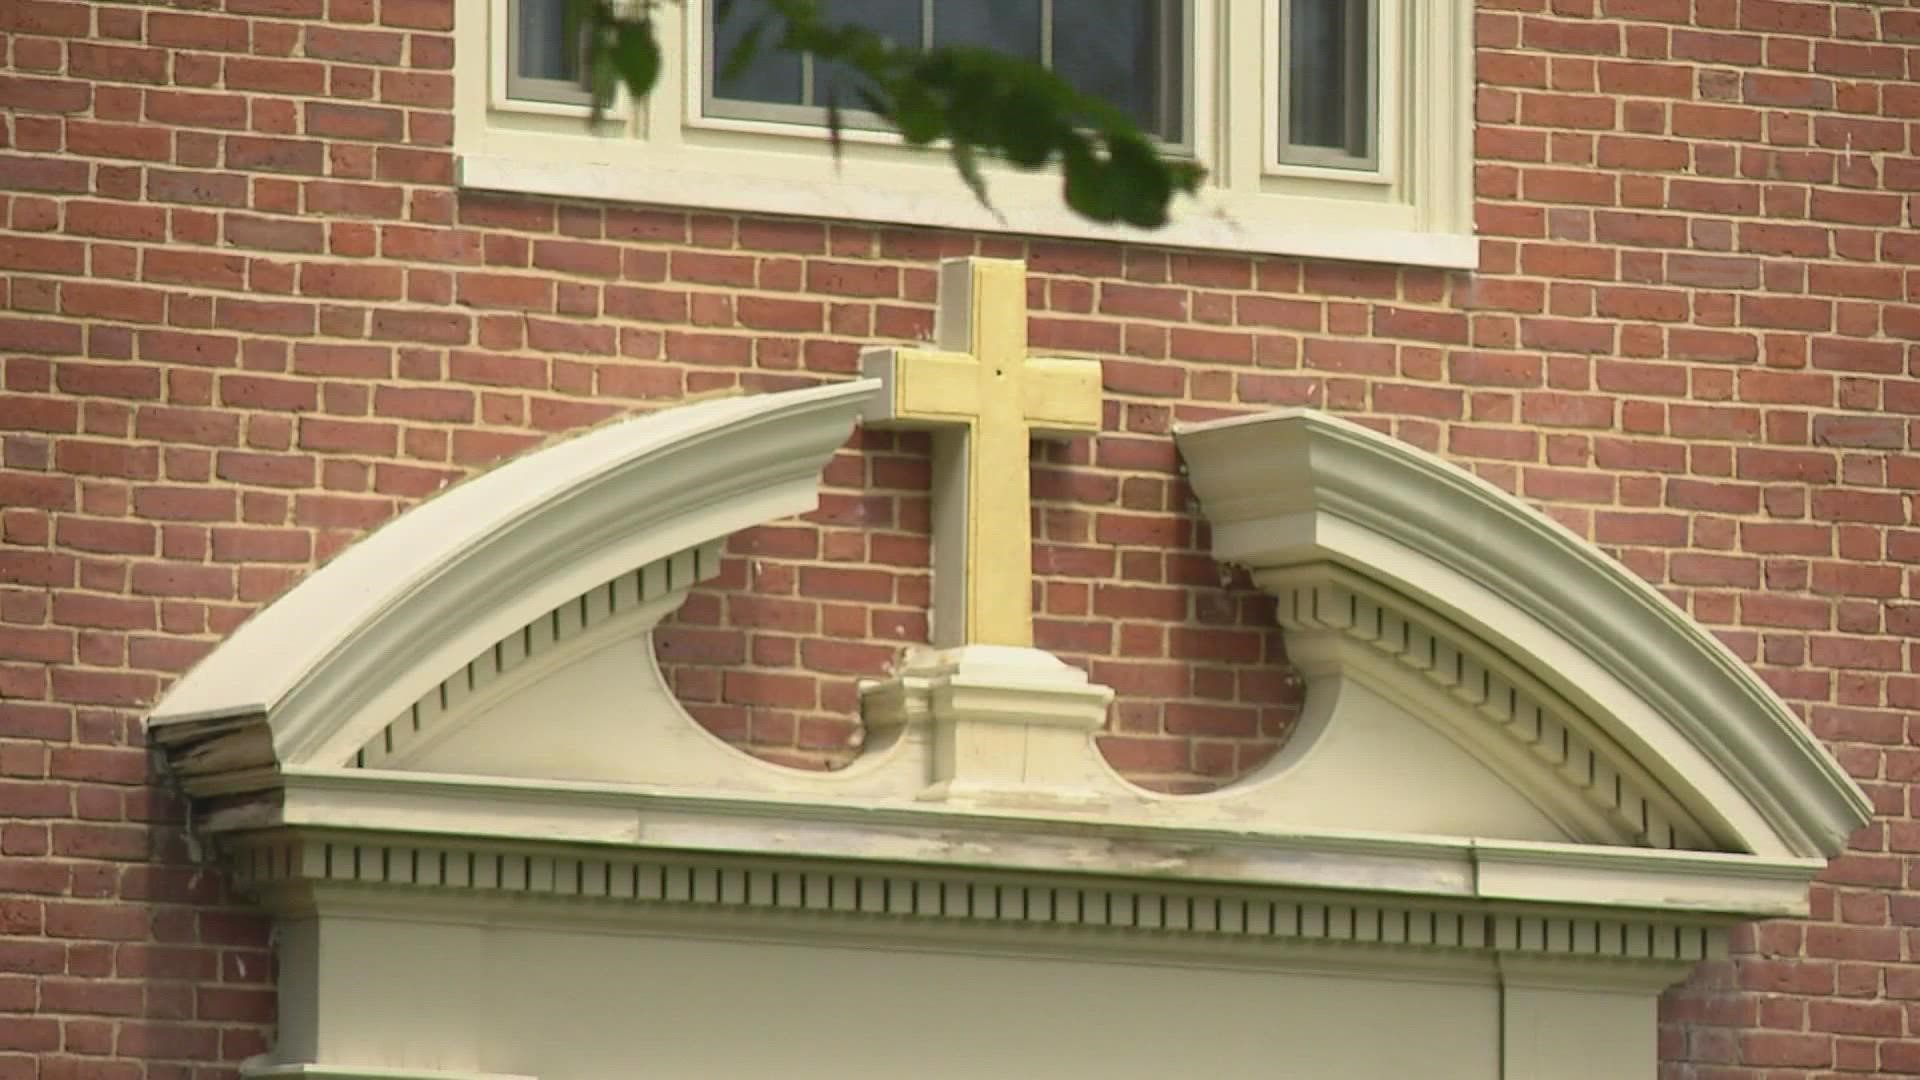 Three sue Catholic diocese under a new Maine child sex abuse law newscentermaine